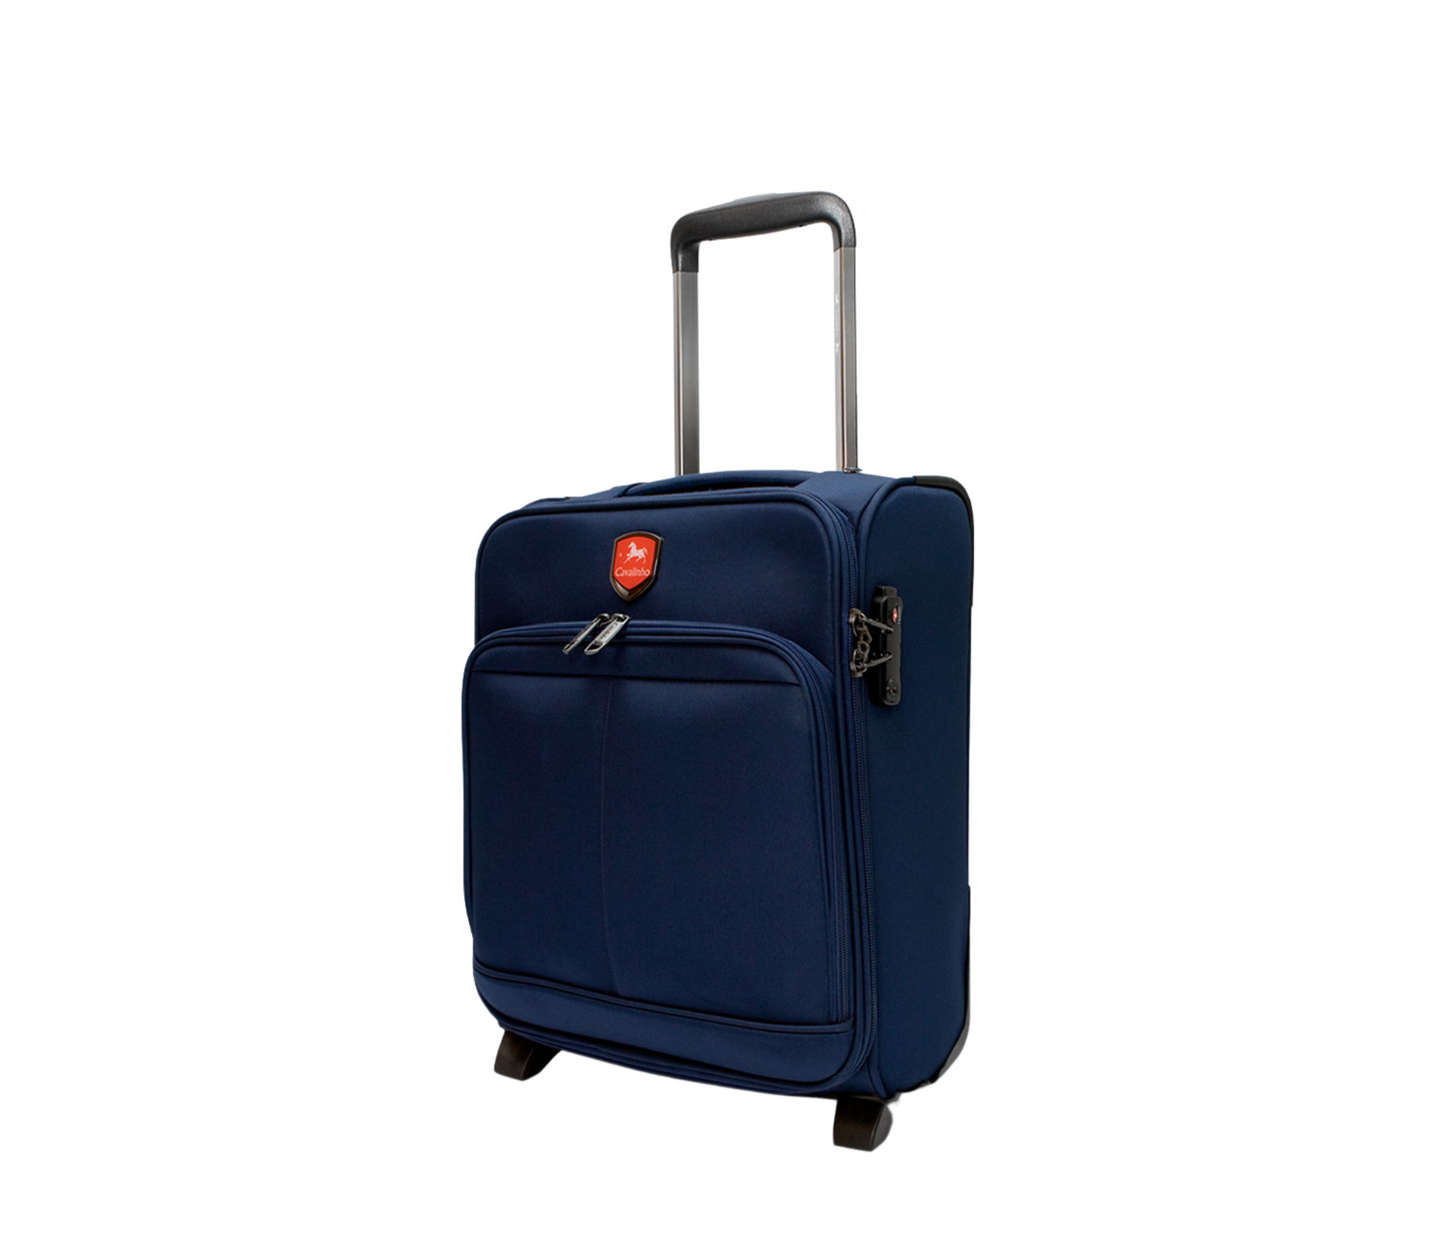 Cavalinho Carry-on Softside Cabin Luggage (16" or 19") - 16 inch SteelBlue - 68020003.03.16_P02